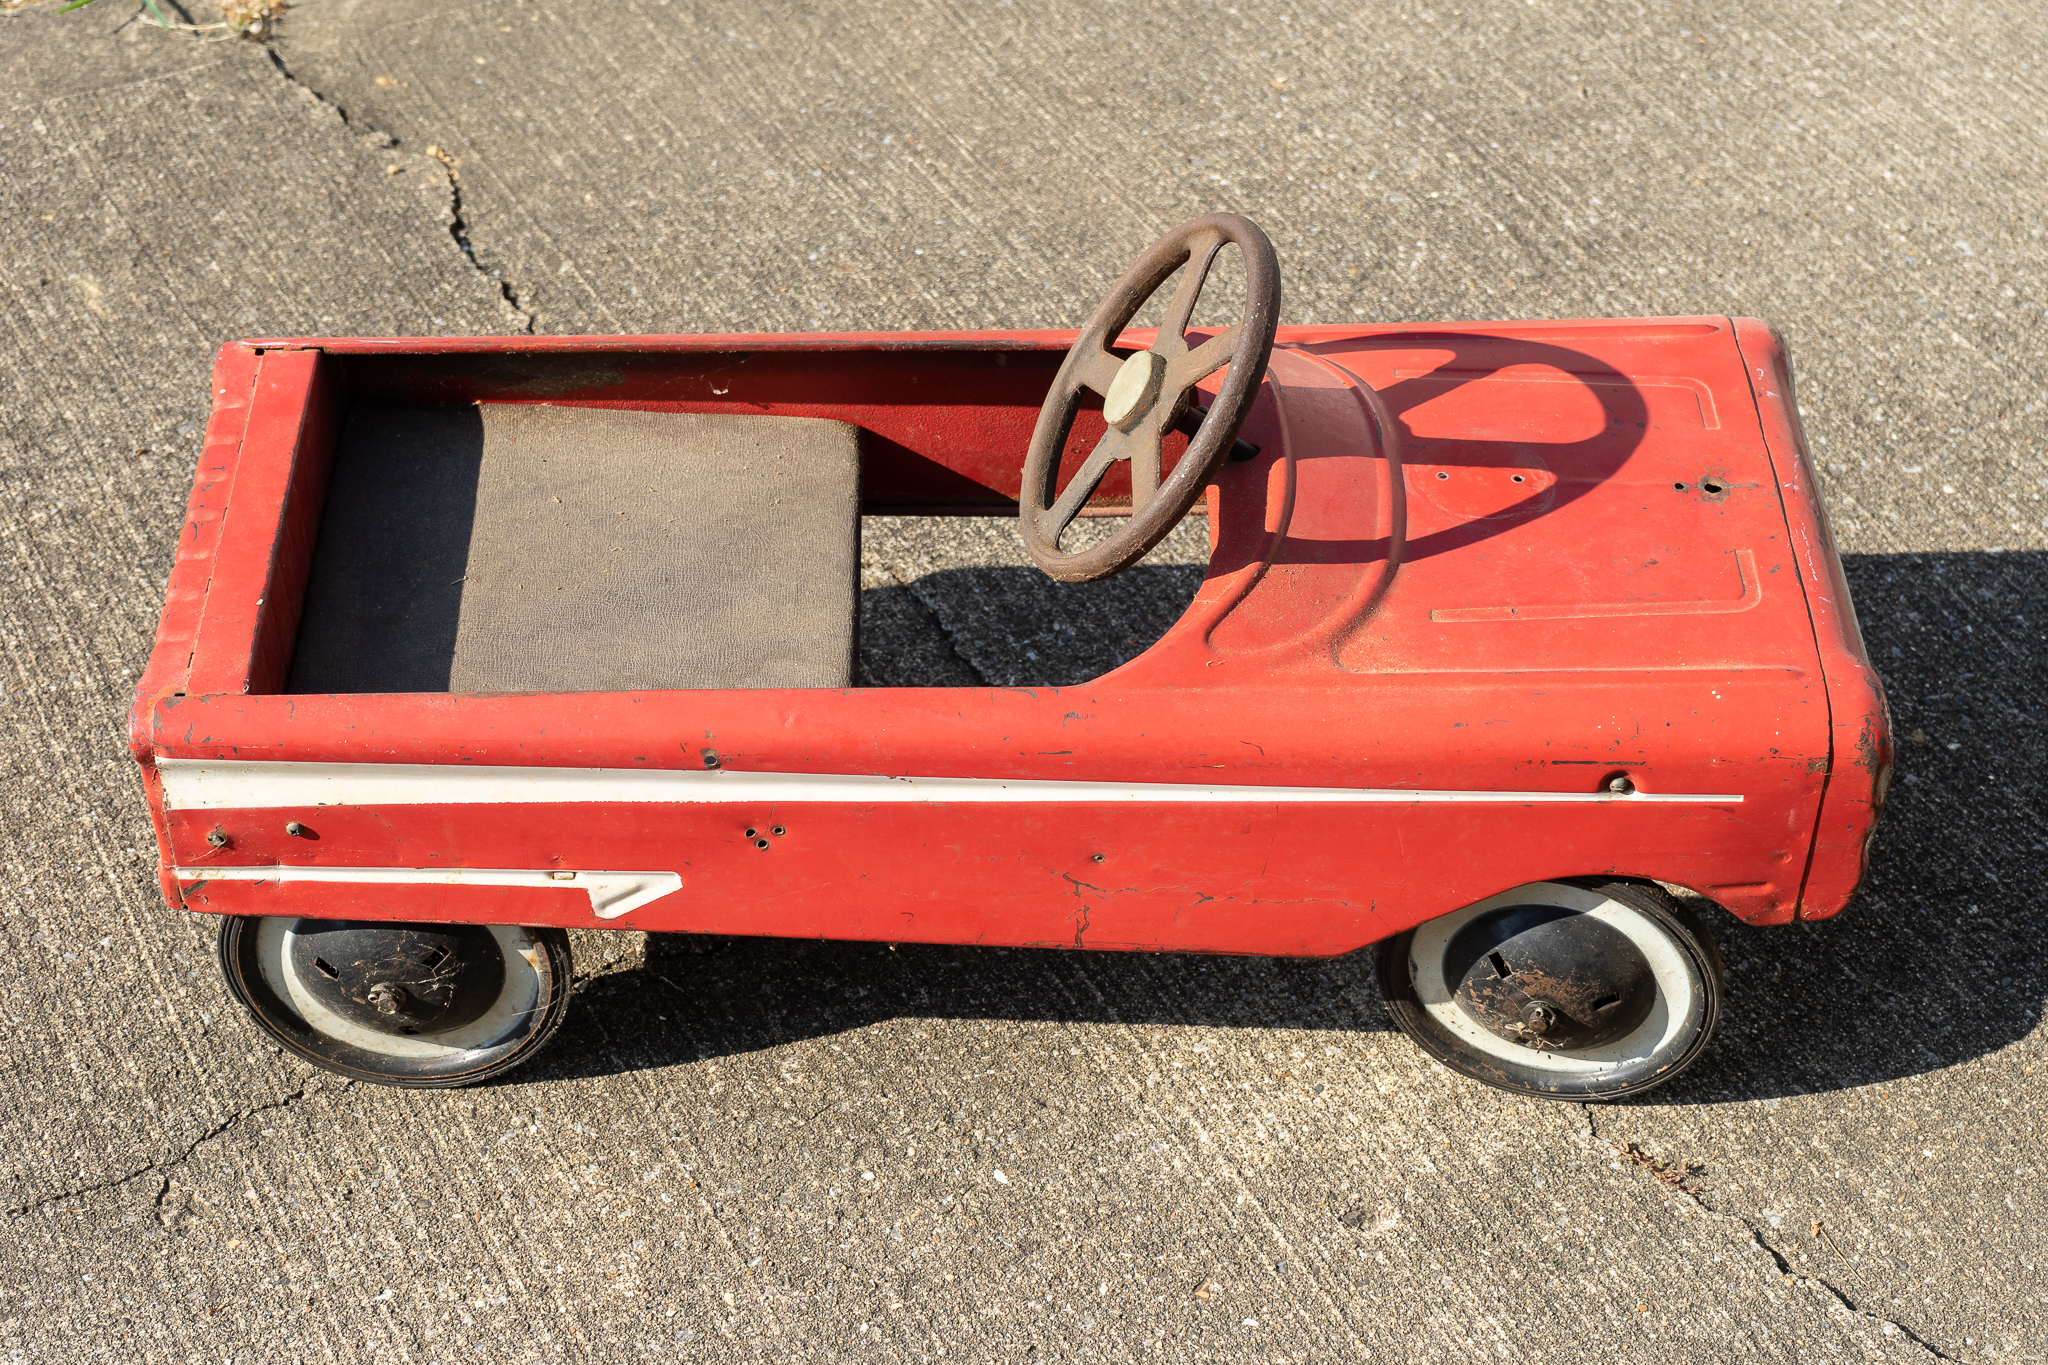 Red Ford Falcon Toy Pedal Car | Harritt Group, Inc